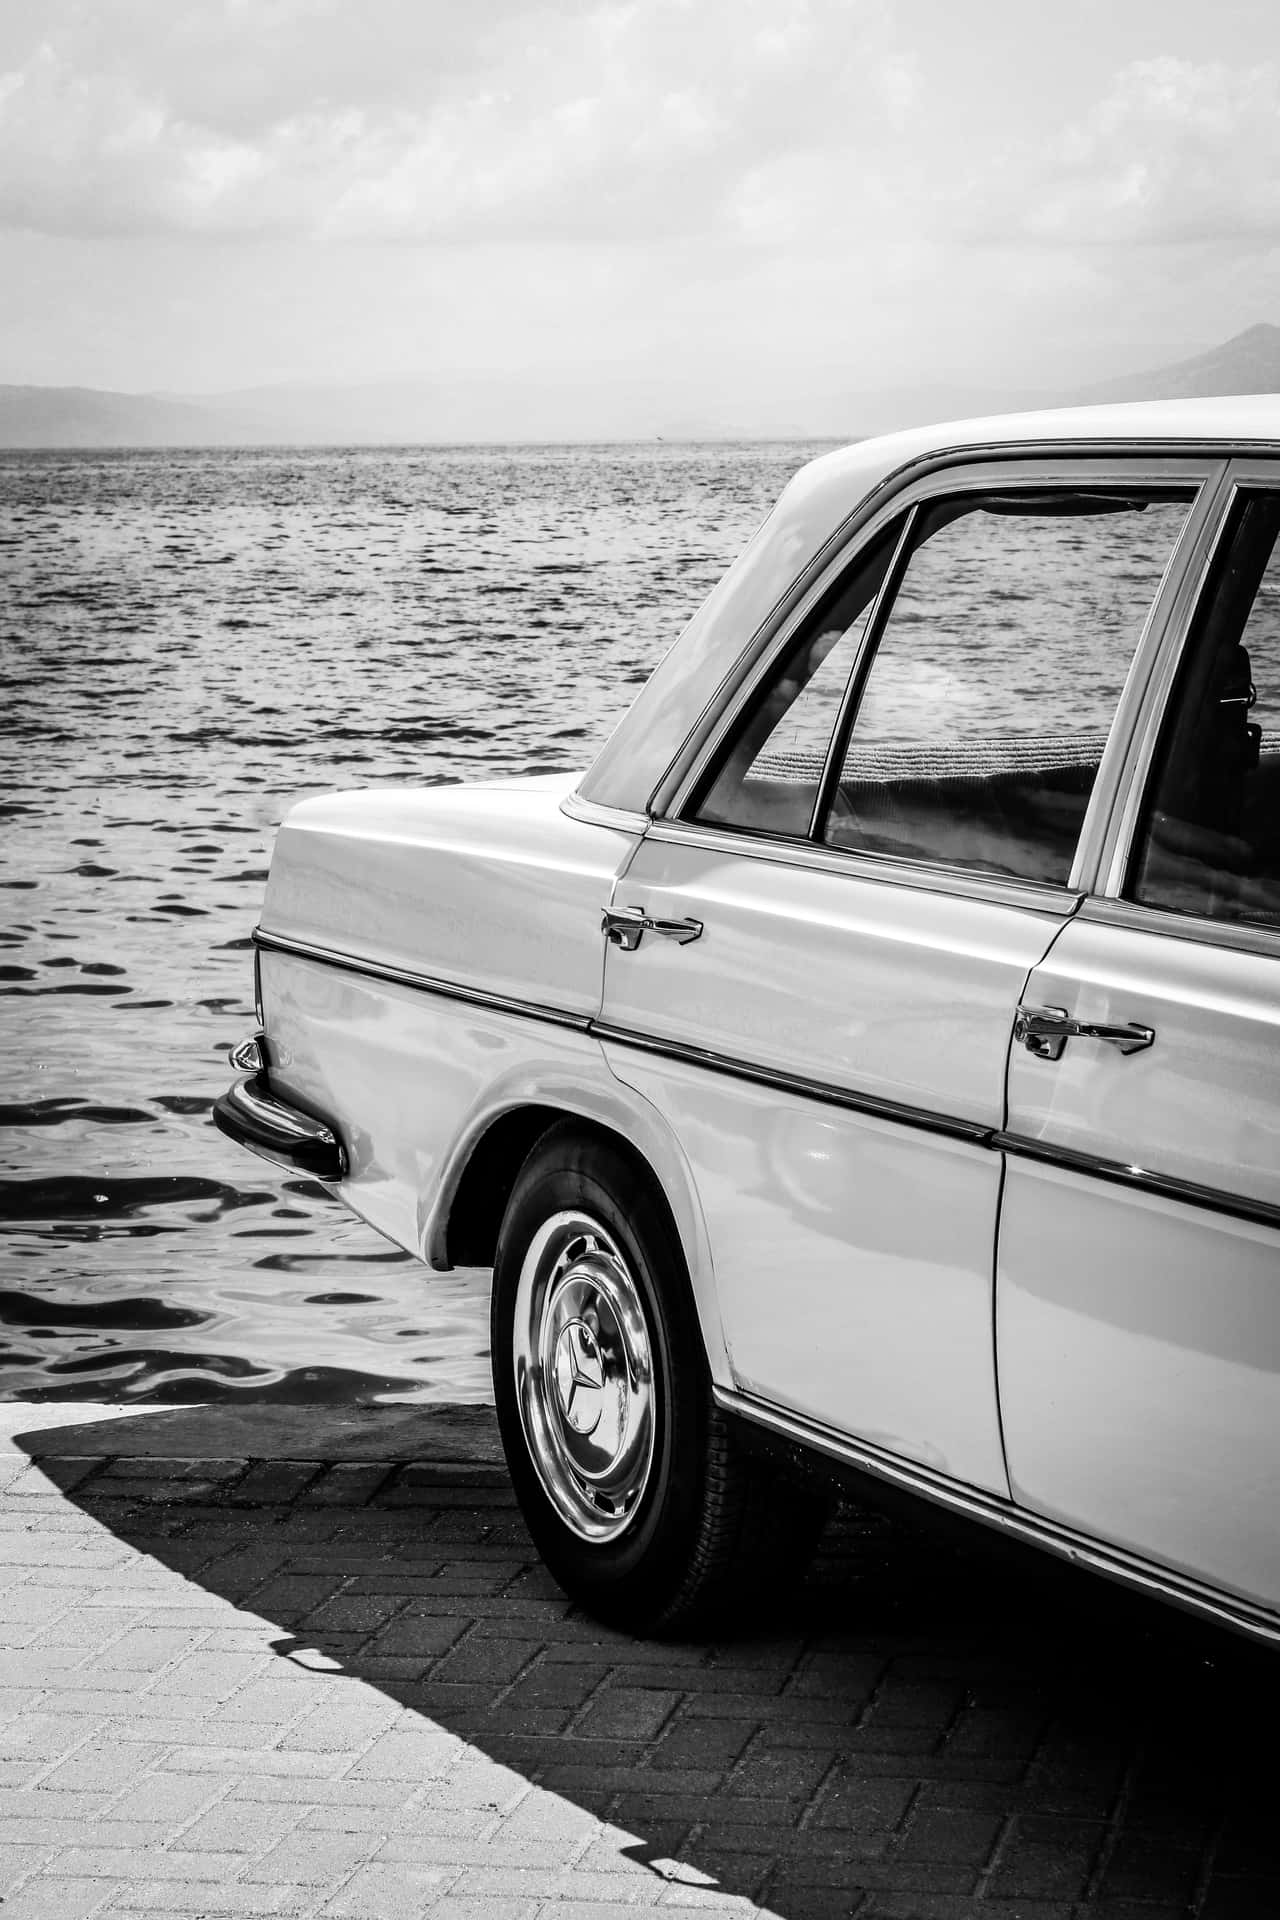 This classic Mercedes E-Class Sedan is the epitome of luxury Wallpaper